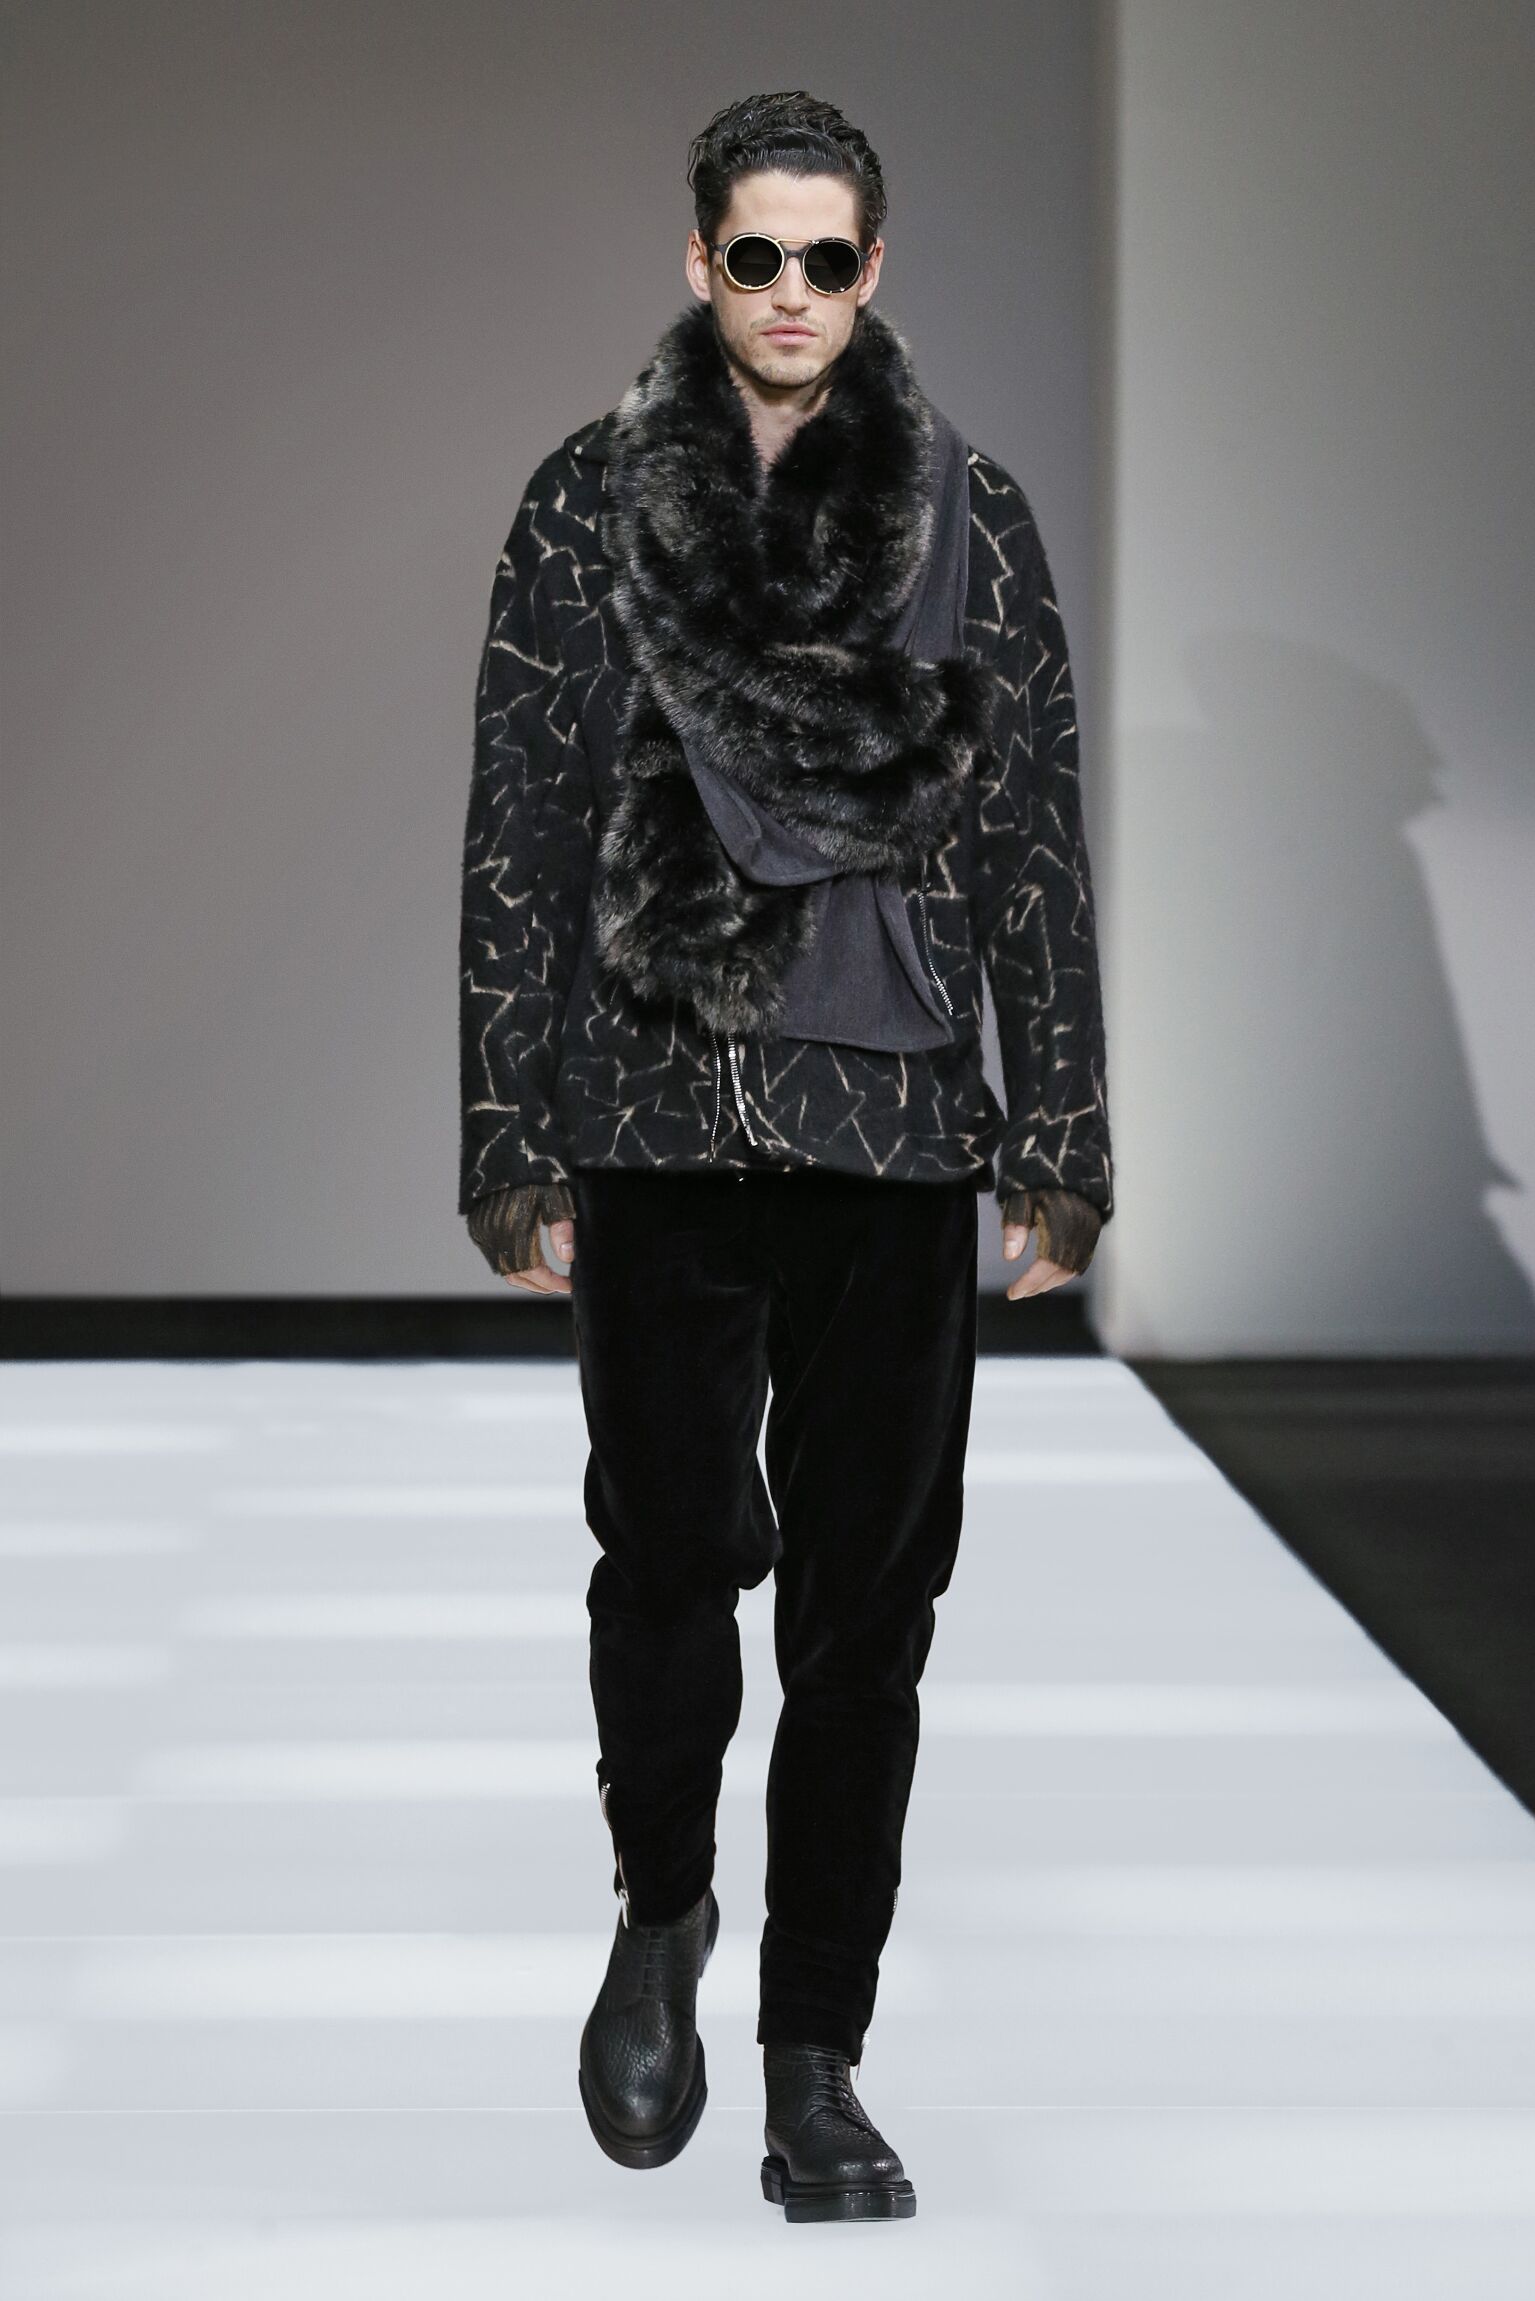 interferentie Gepland Netelig EMPORIO ARMANI FALL WINTER 2015-16 MEN'S COLLECTION | The Skinny Beep